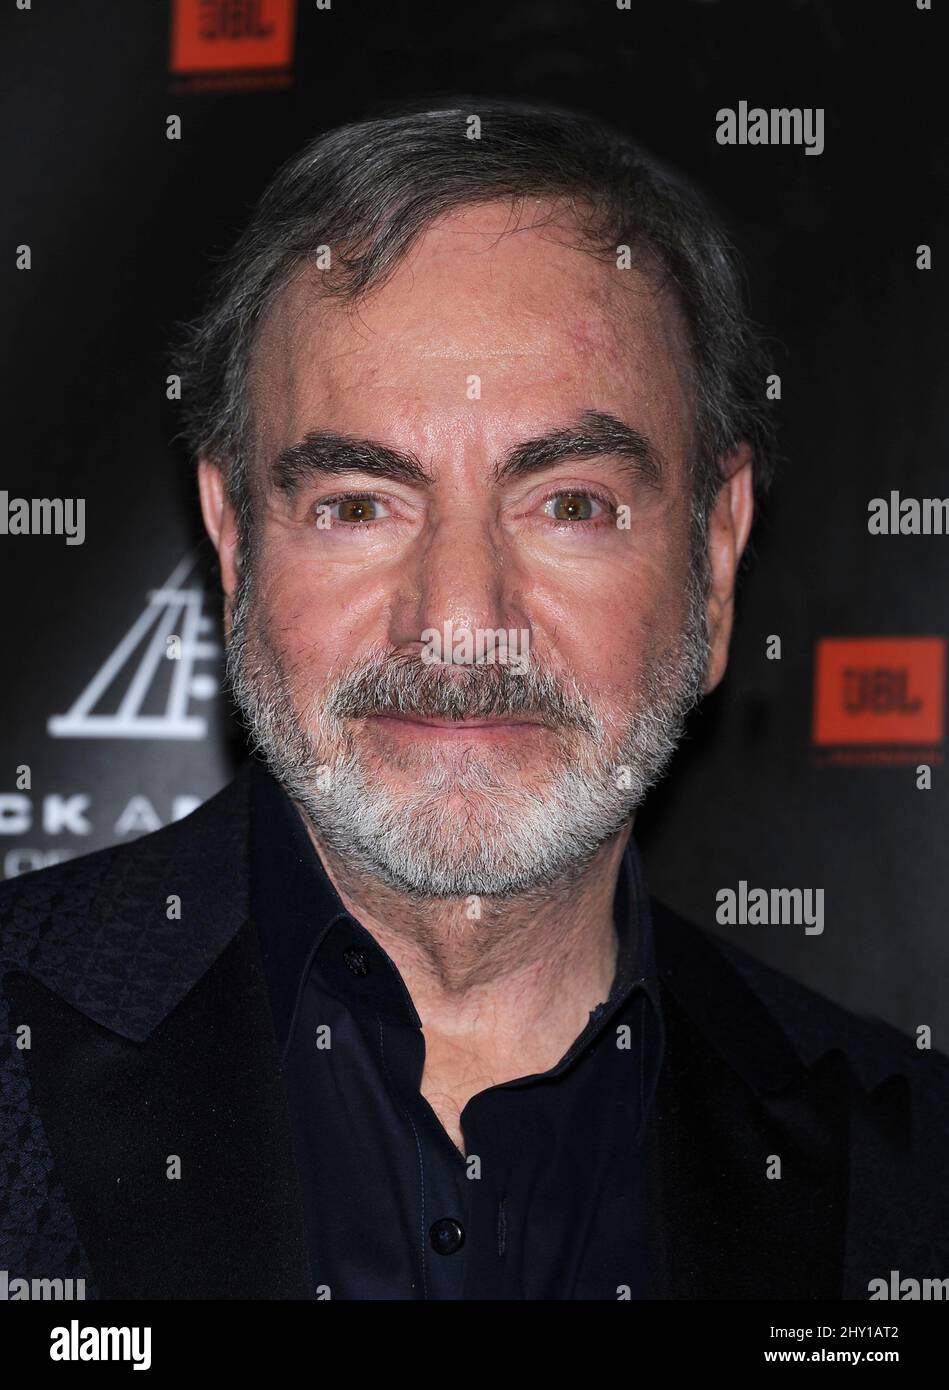 Neil Diamond attending the 28th Annual Rock and Roll Hall of Fame Induction Ceremony at Nokia Theatre in Los Angeles, California. Stock Photo